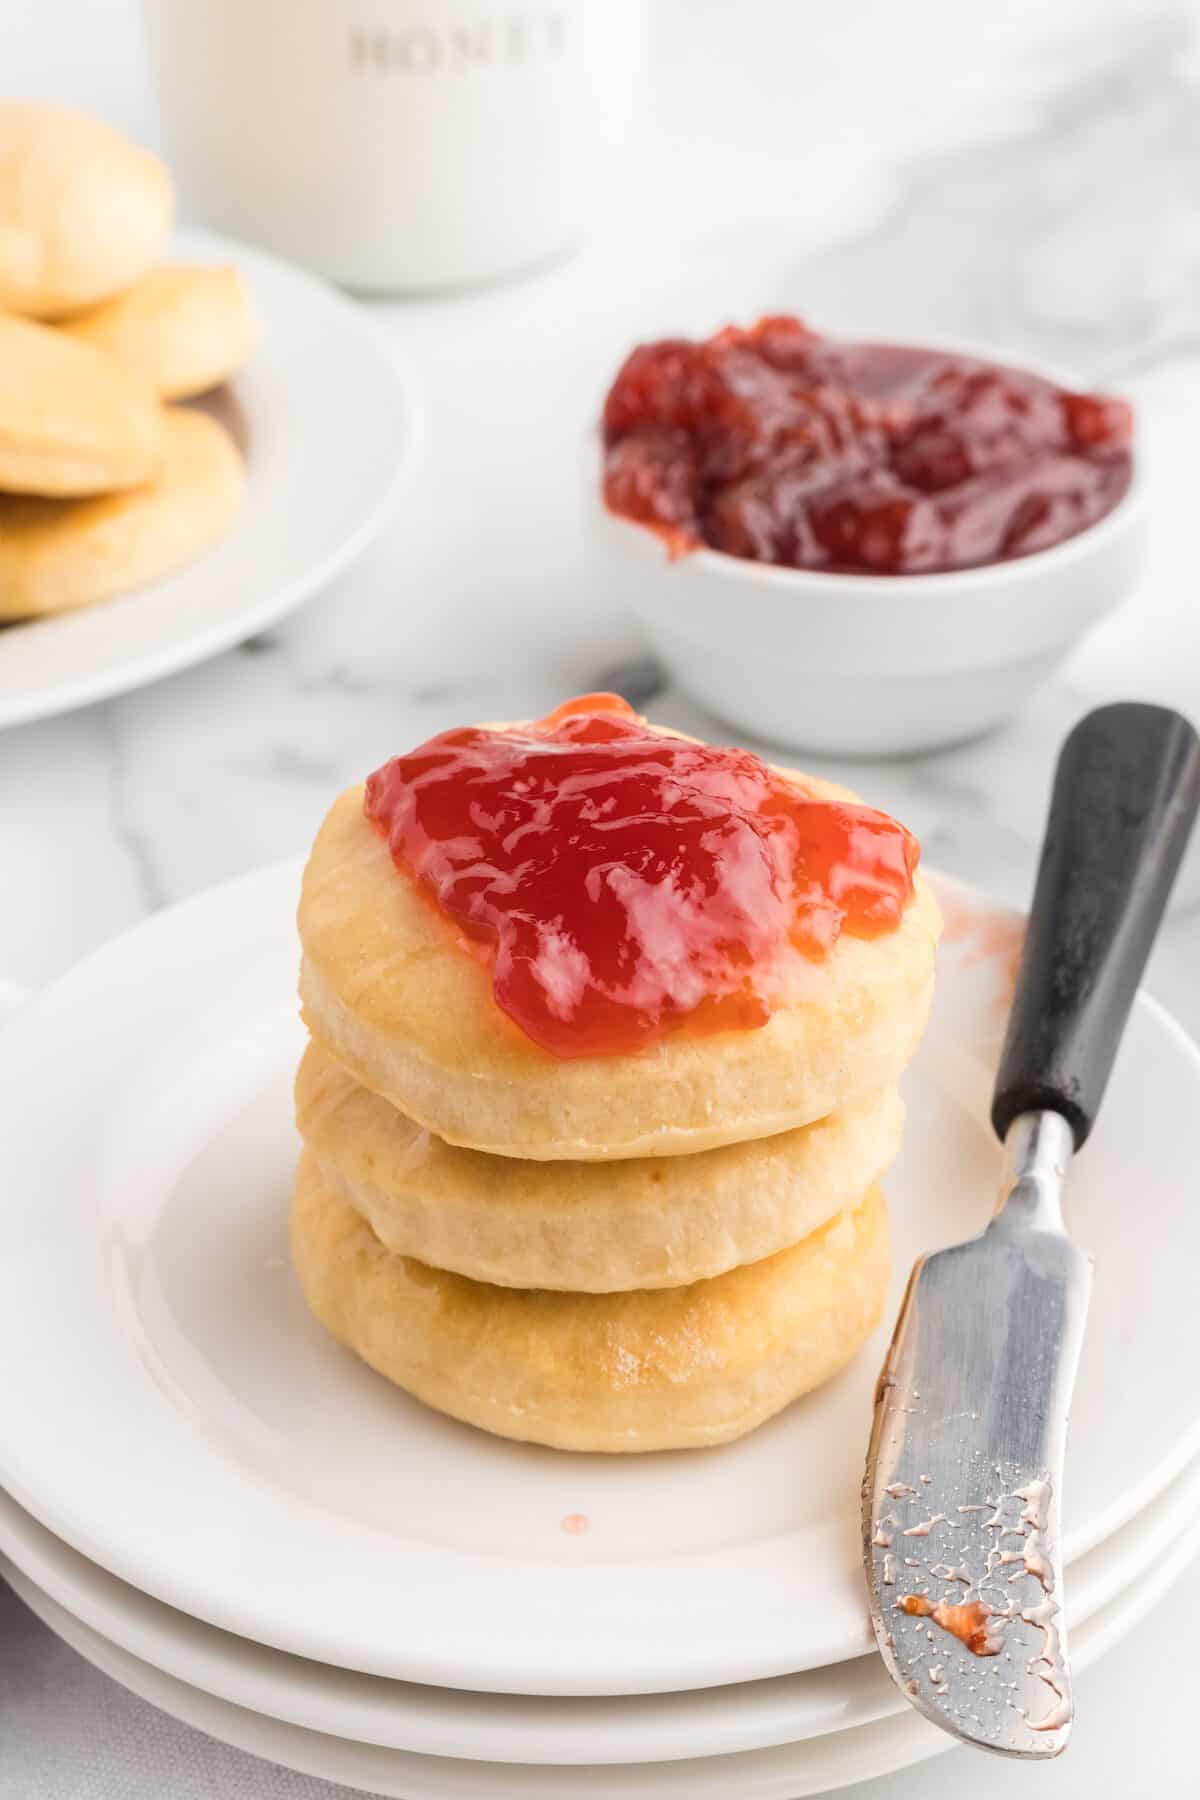 jam spread over the top of the fresh scones. 